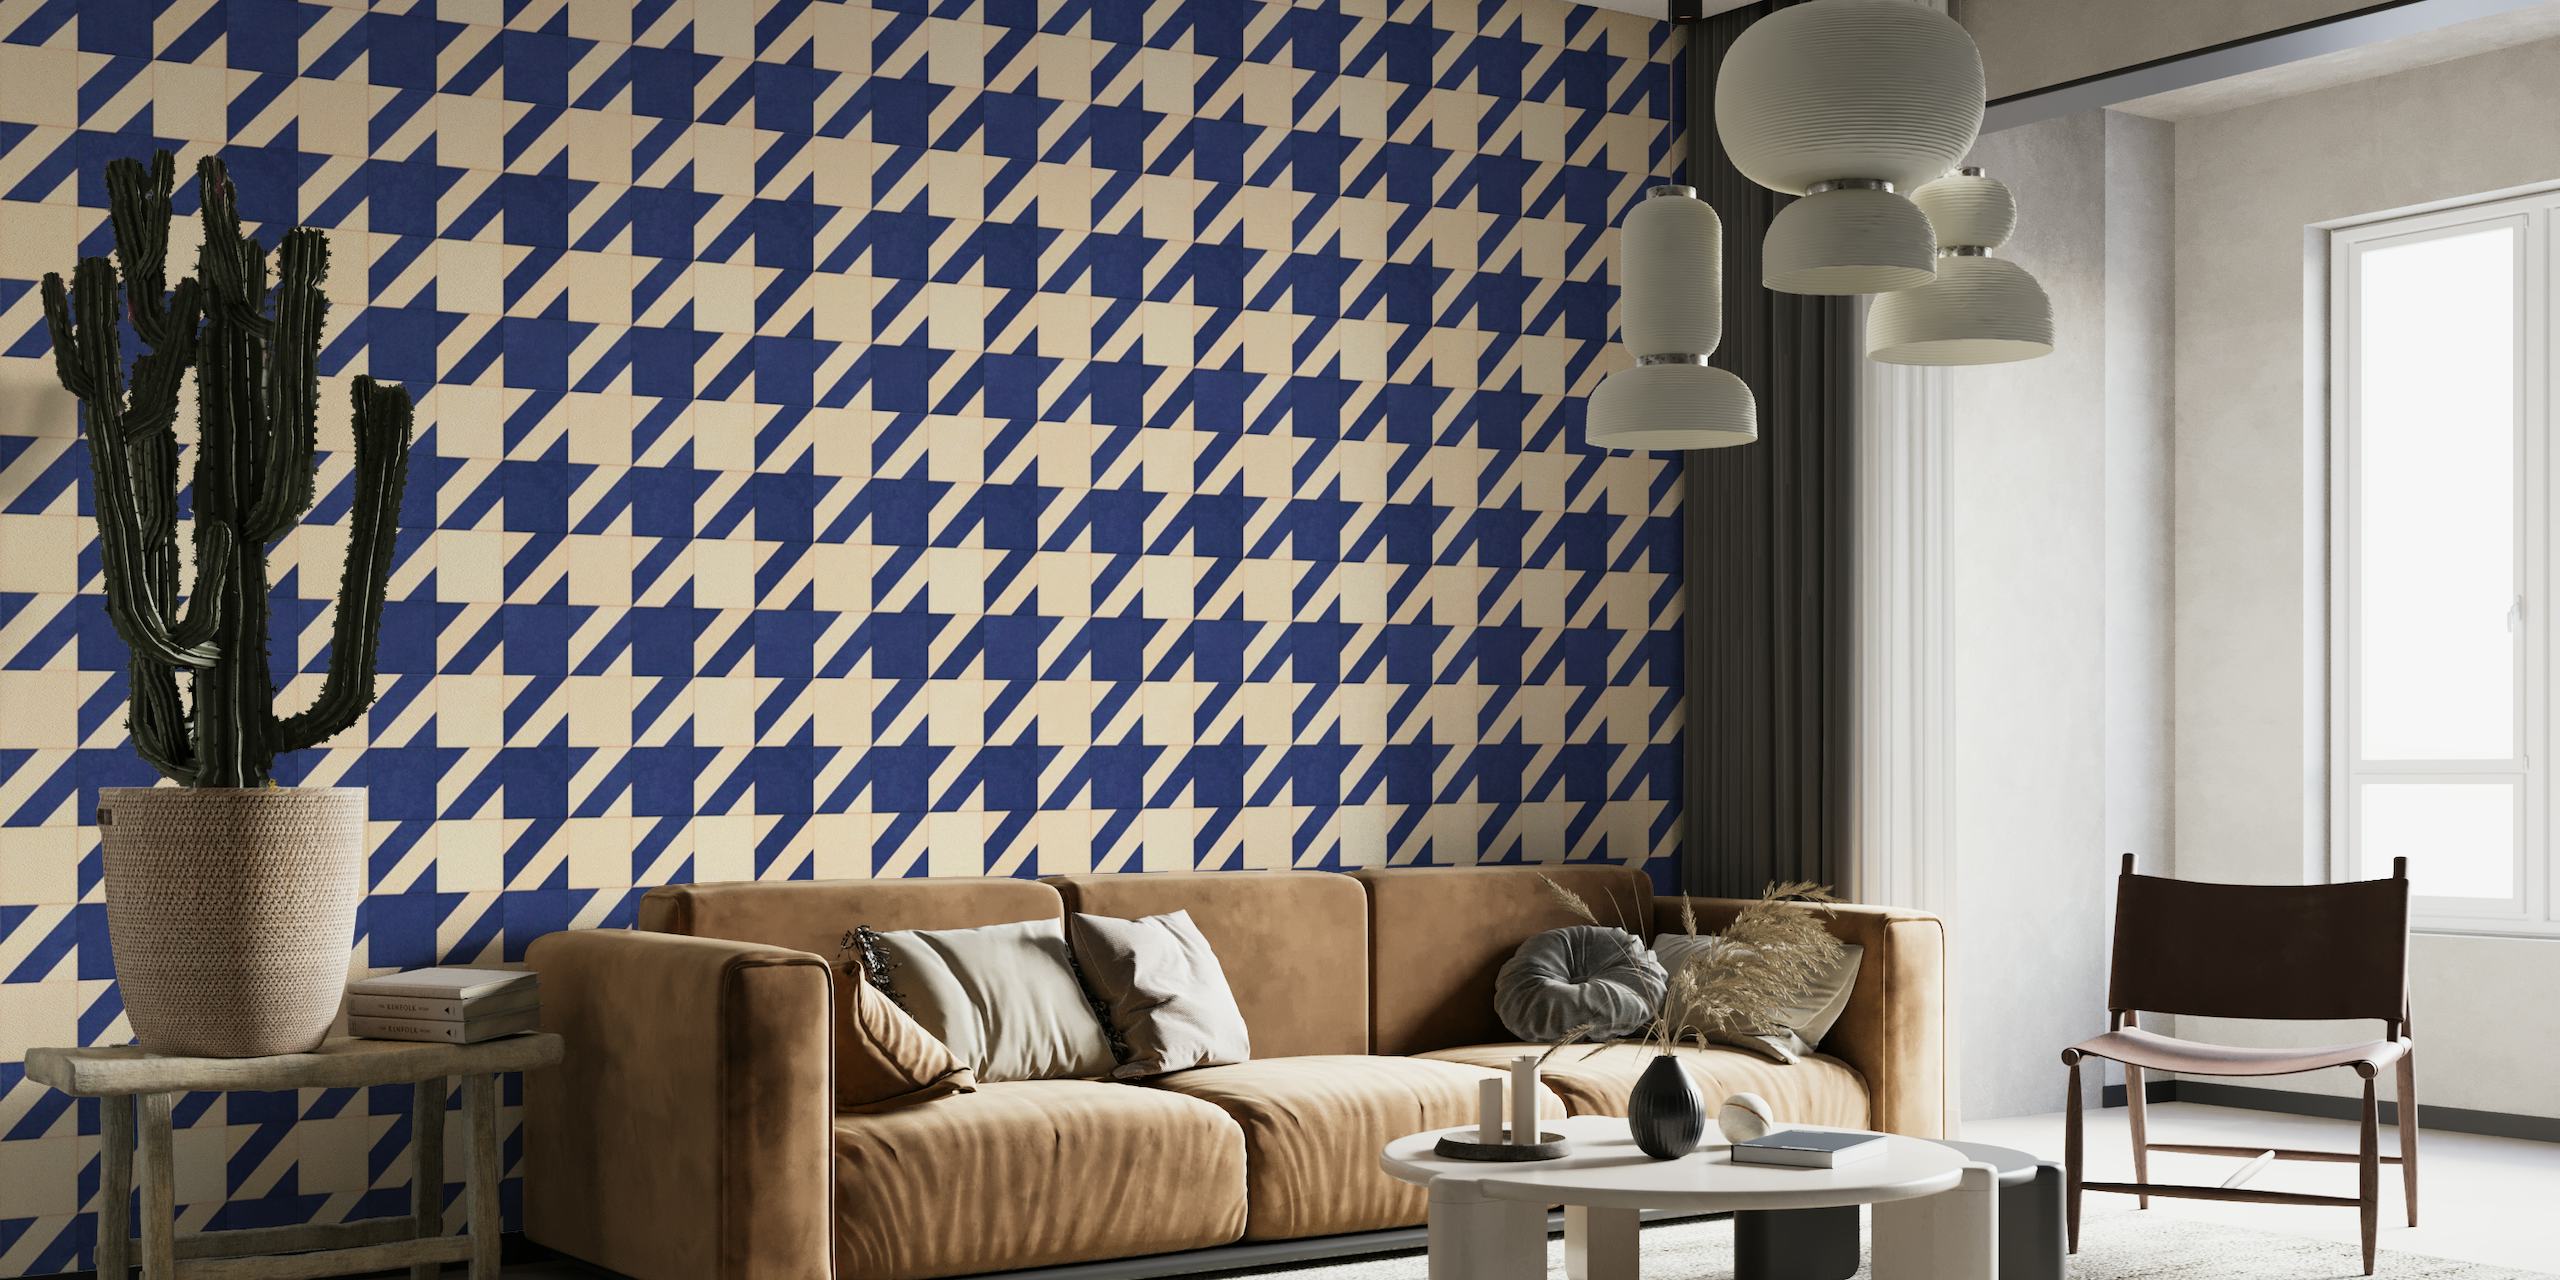 TILES 011 A - Houndstooth tapetit